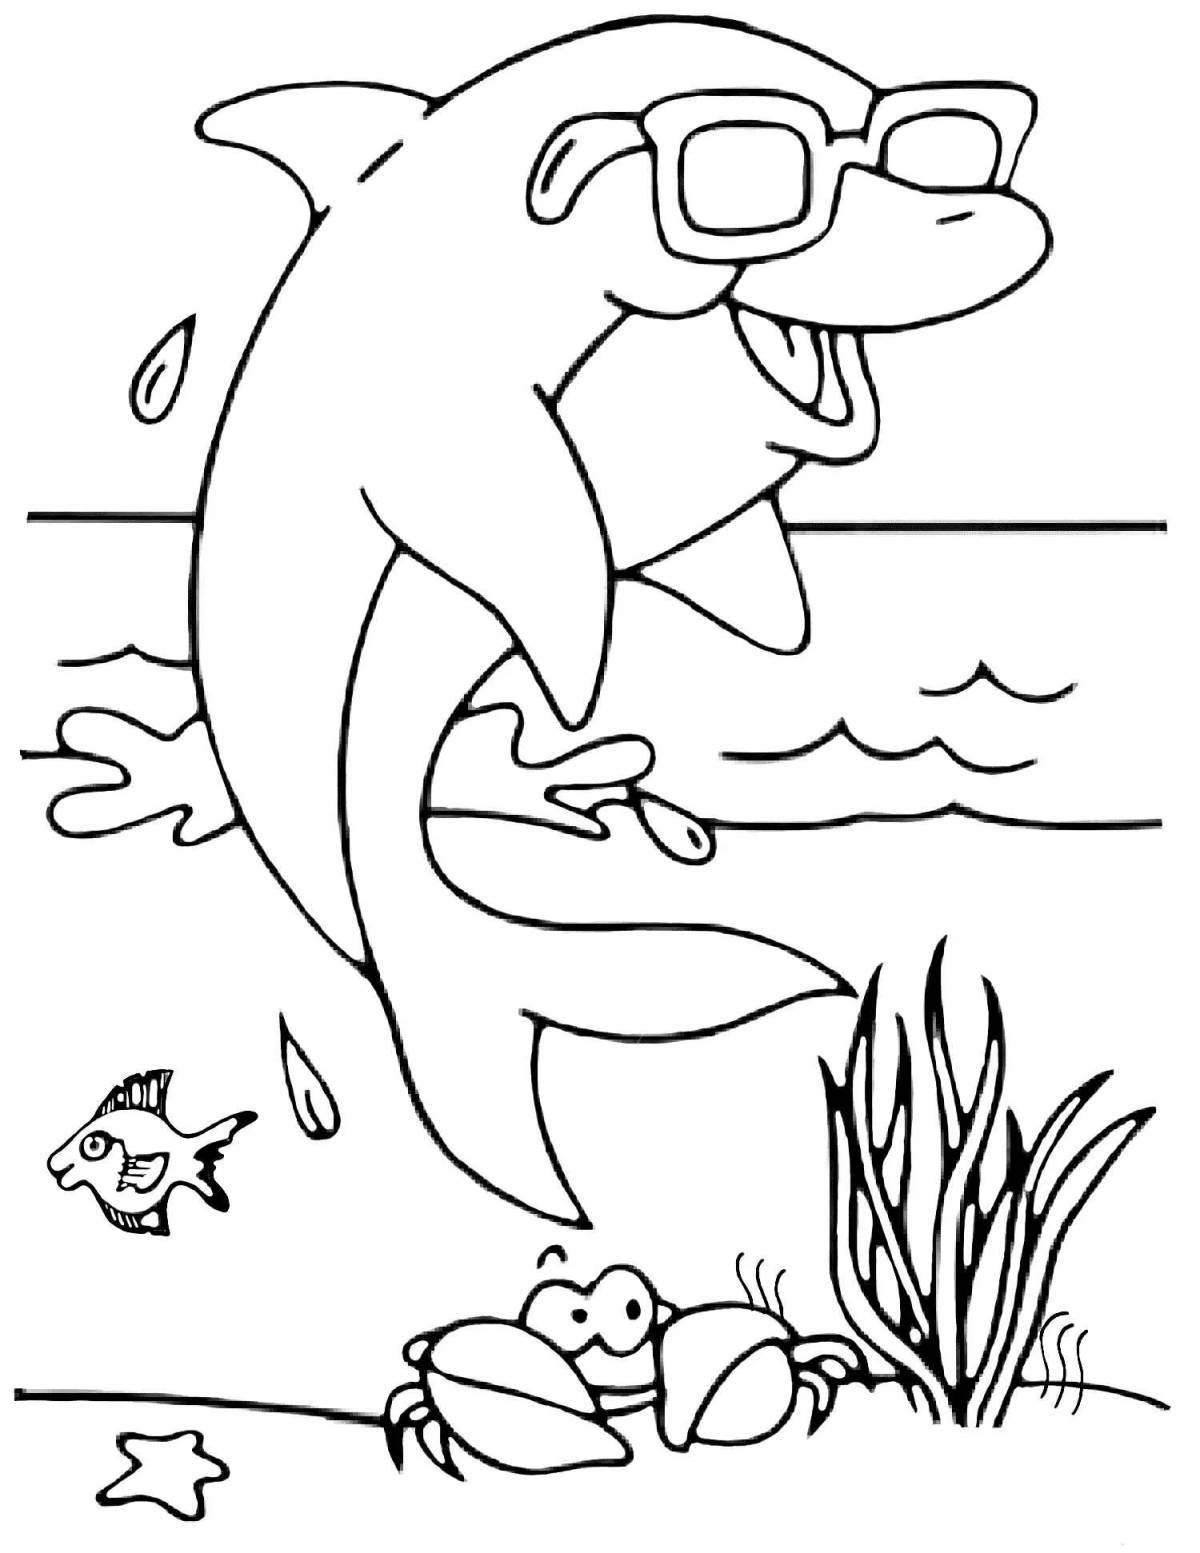 Adorable dolphin coloring book for kids